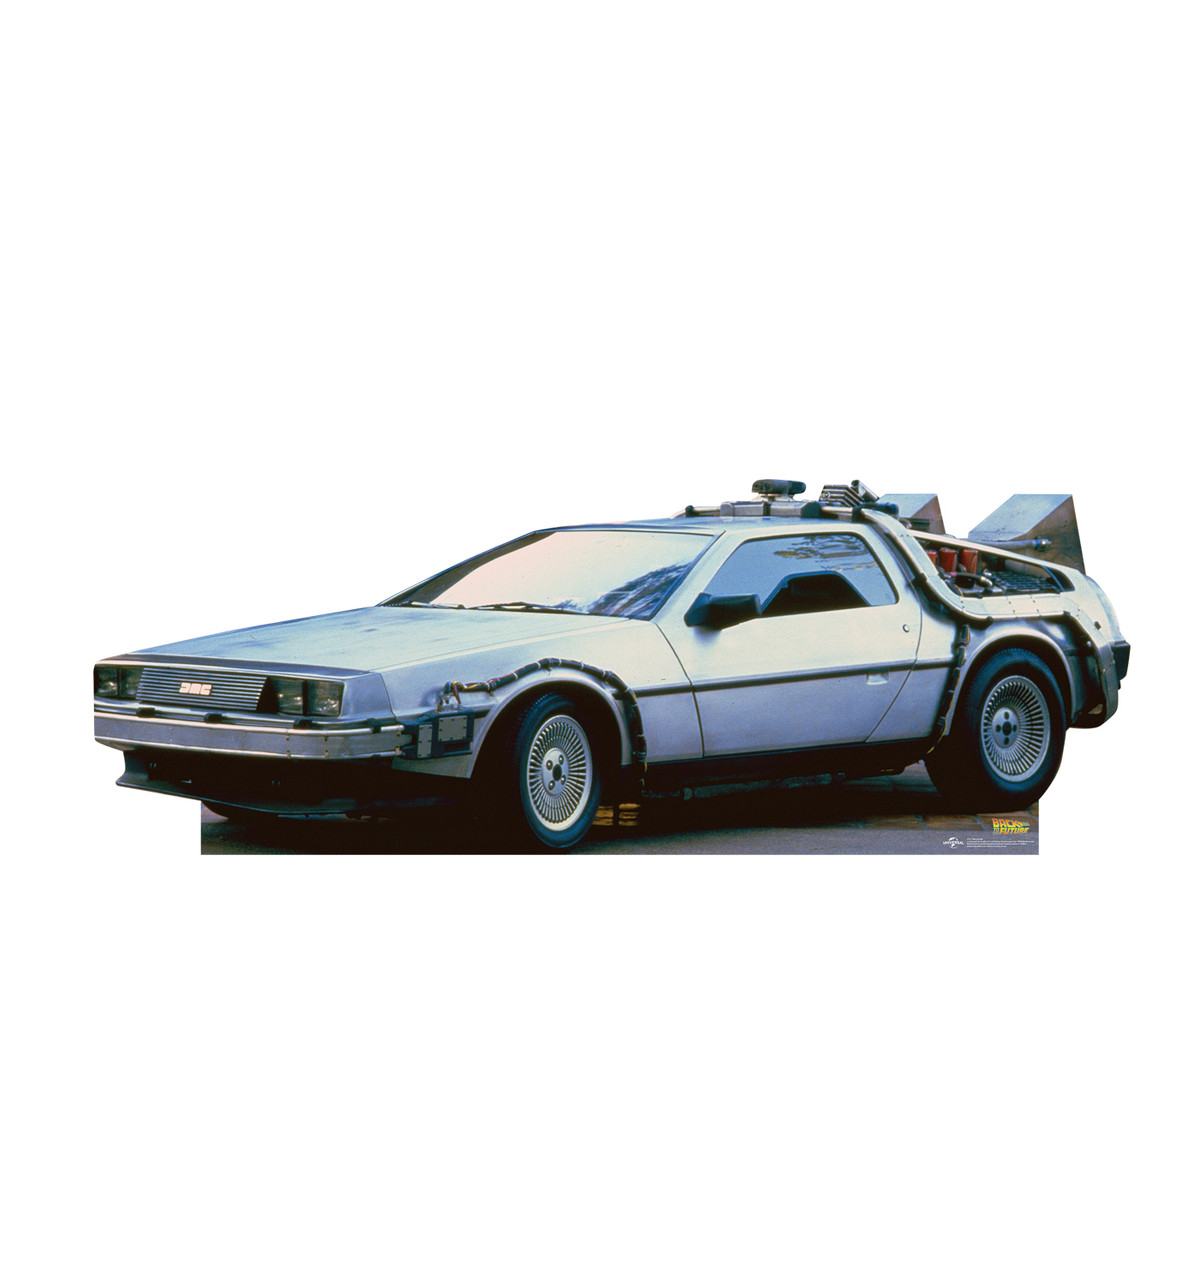 Life-size cardboard  standee of the DeLorean from Back to the Future movies.